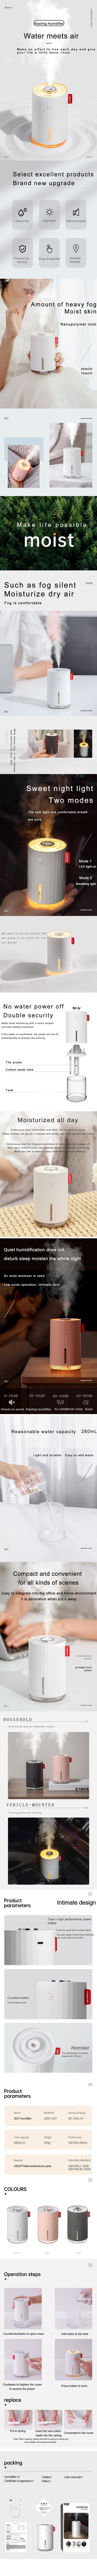 280ml Portable Mini Cool Mist Humidifier with Night Light,USB Desktop Humidifier for Bedroom Car Travel Office